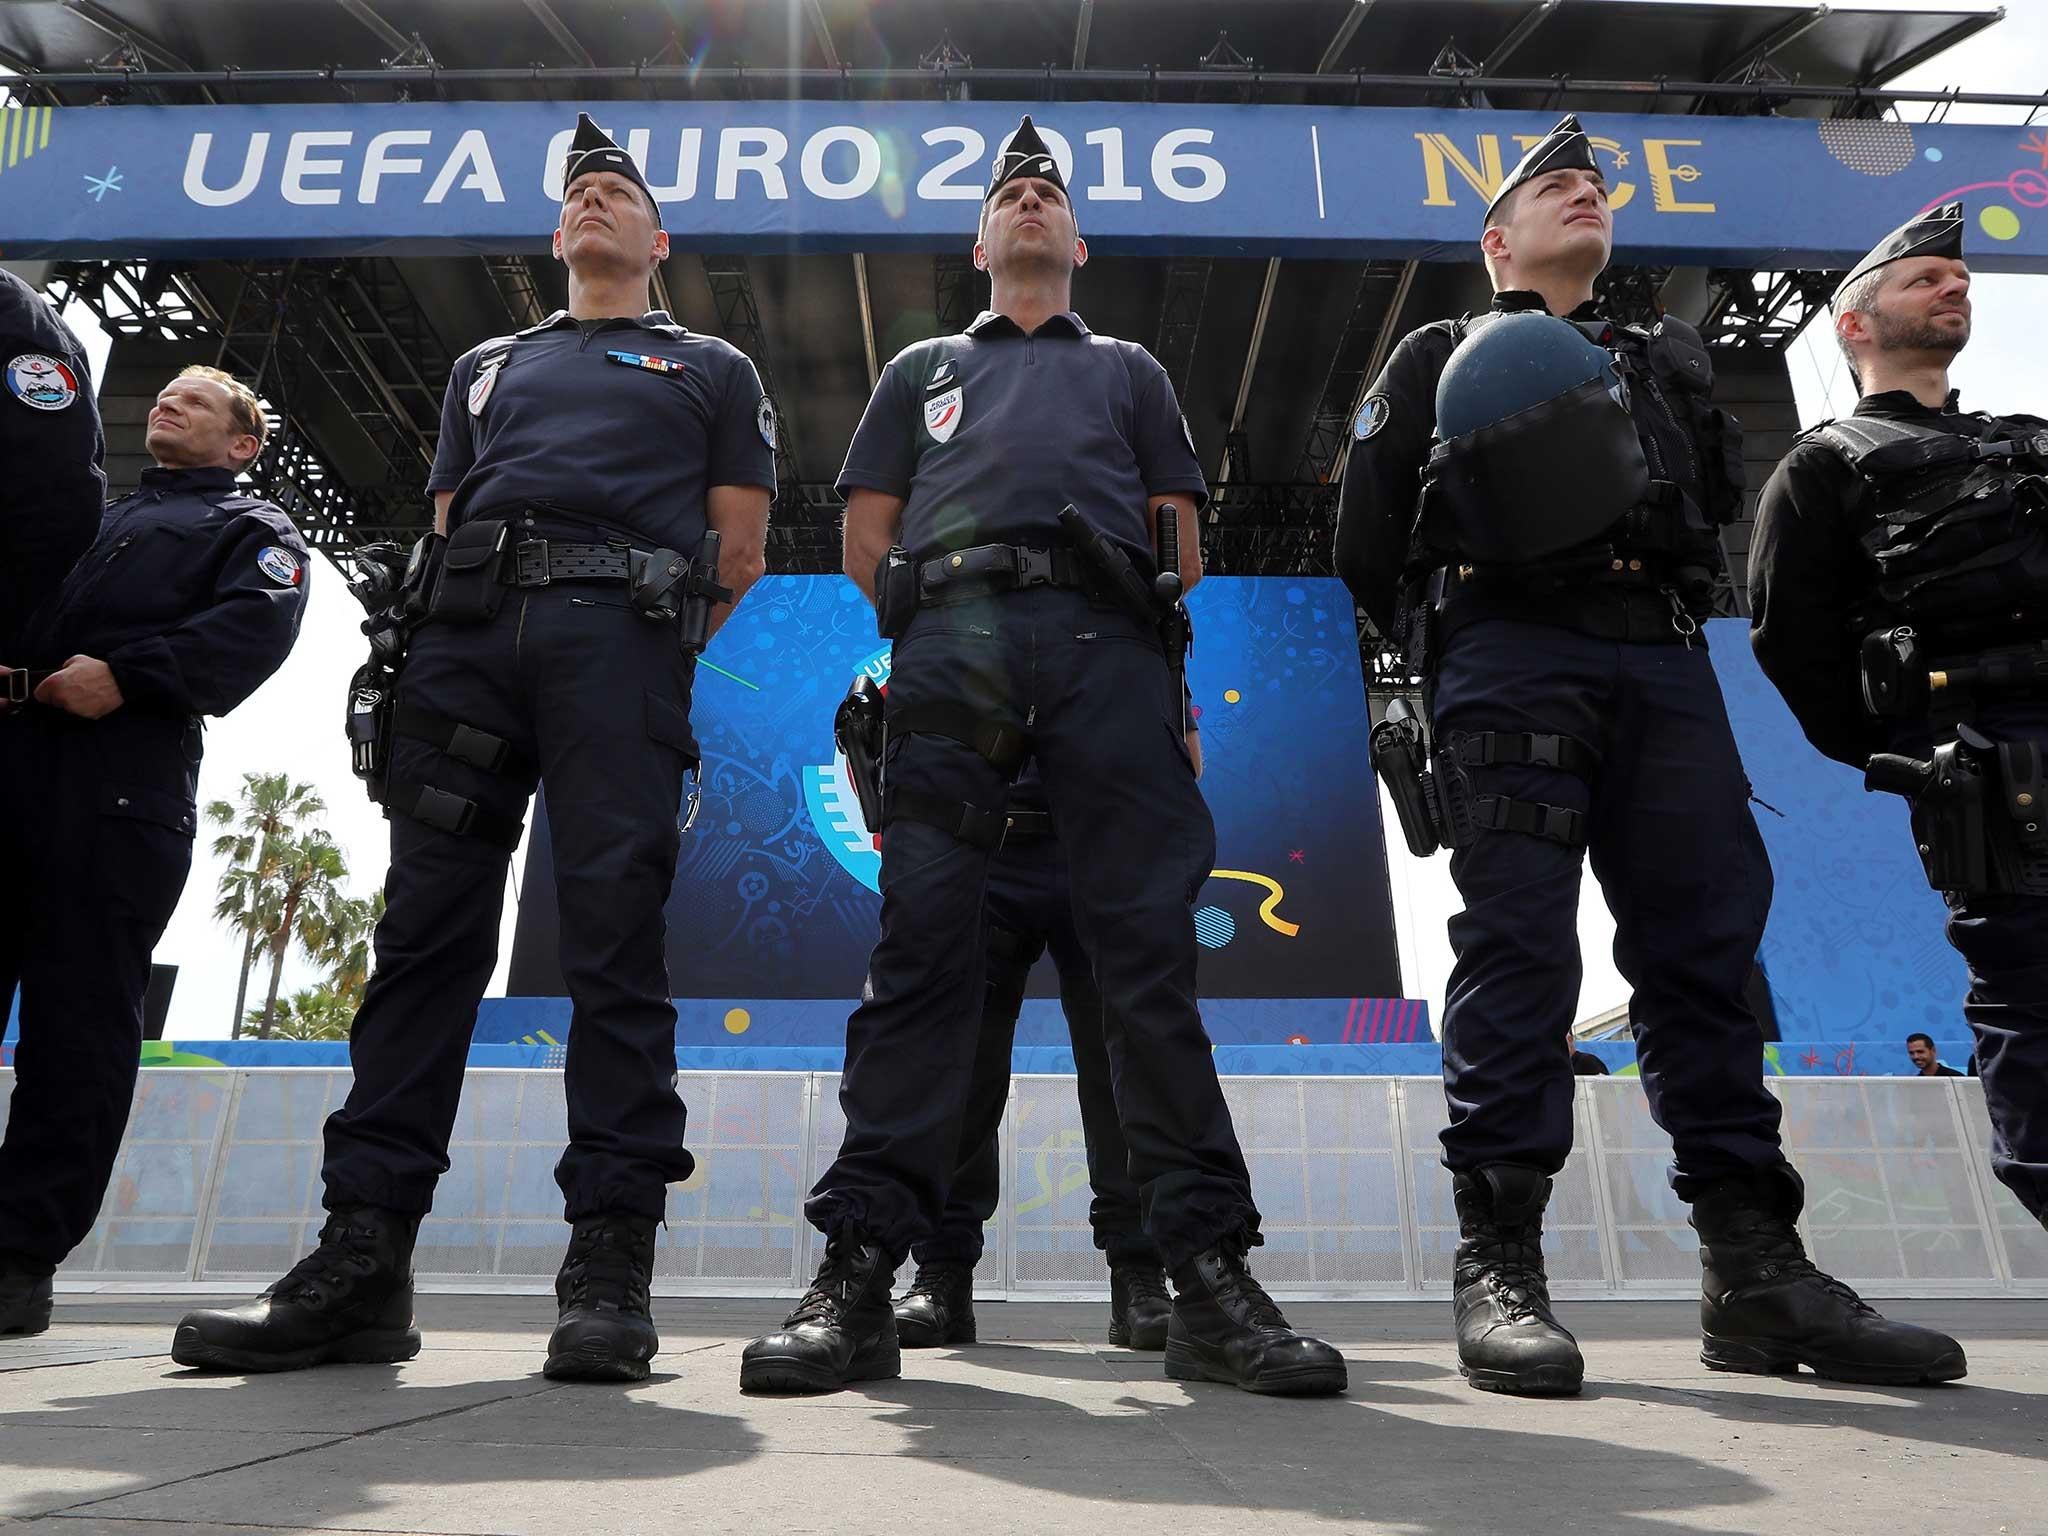 Security will be tight for Euro 2016